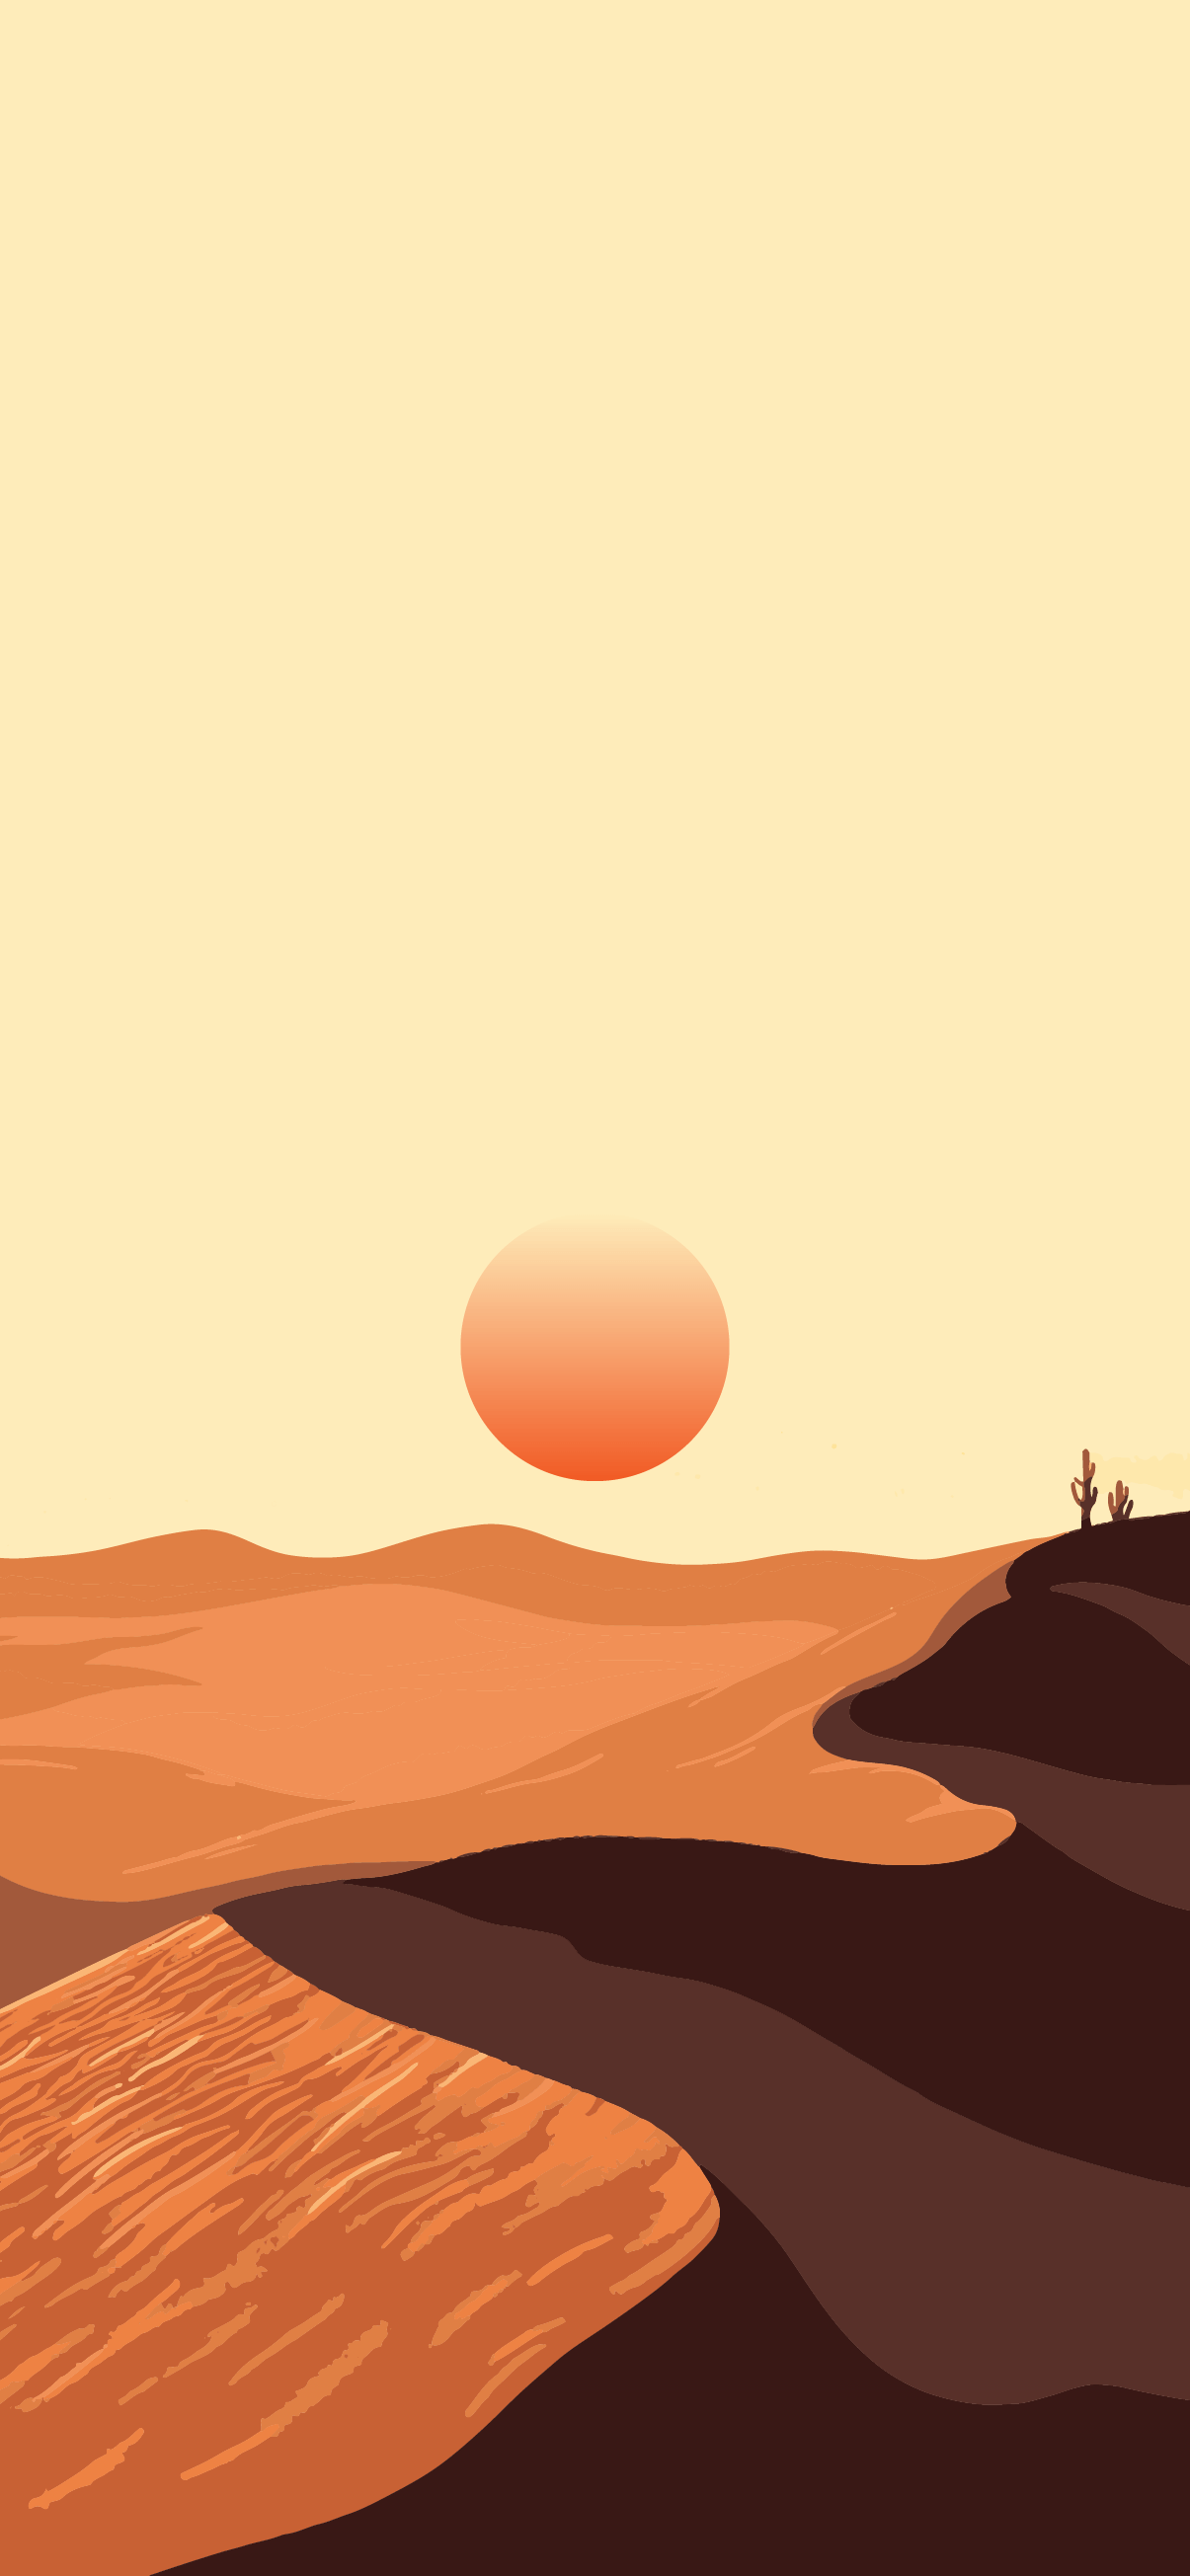 A minimalist desert landscape with a large sun in the middle - Desert